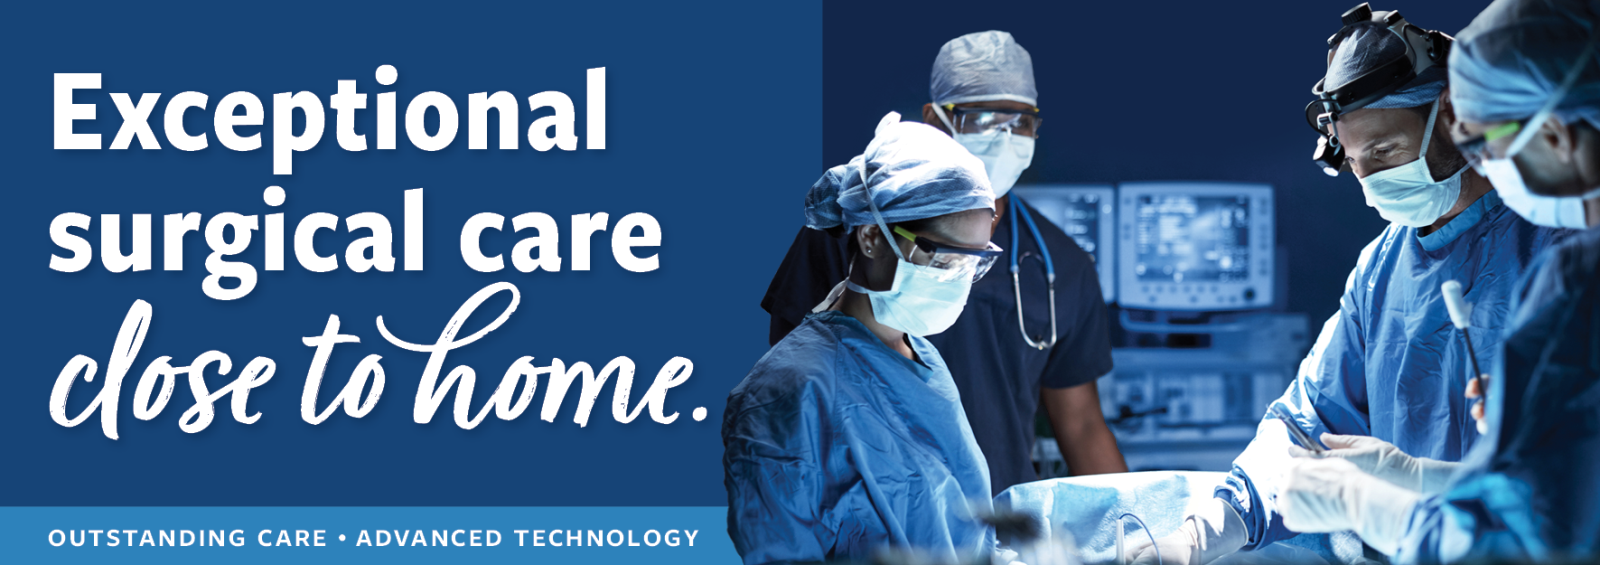 Photo of surgeons in an operating room. Text reads, "Exceptional surgical care close to home."